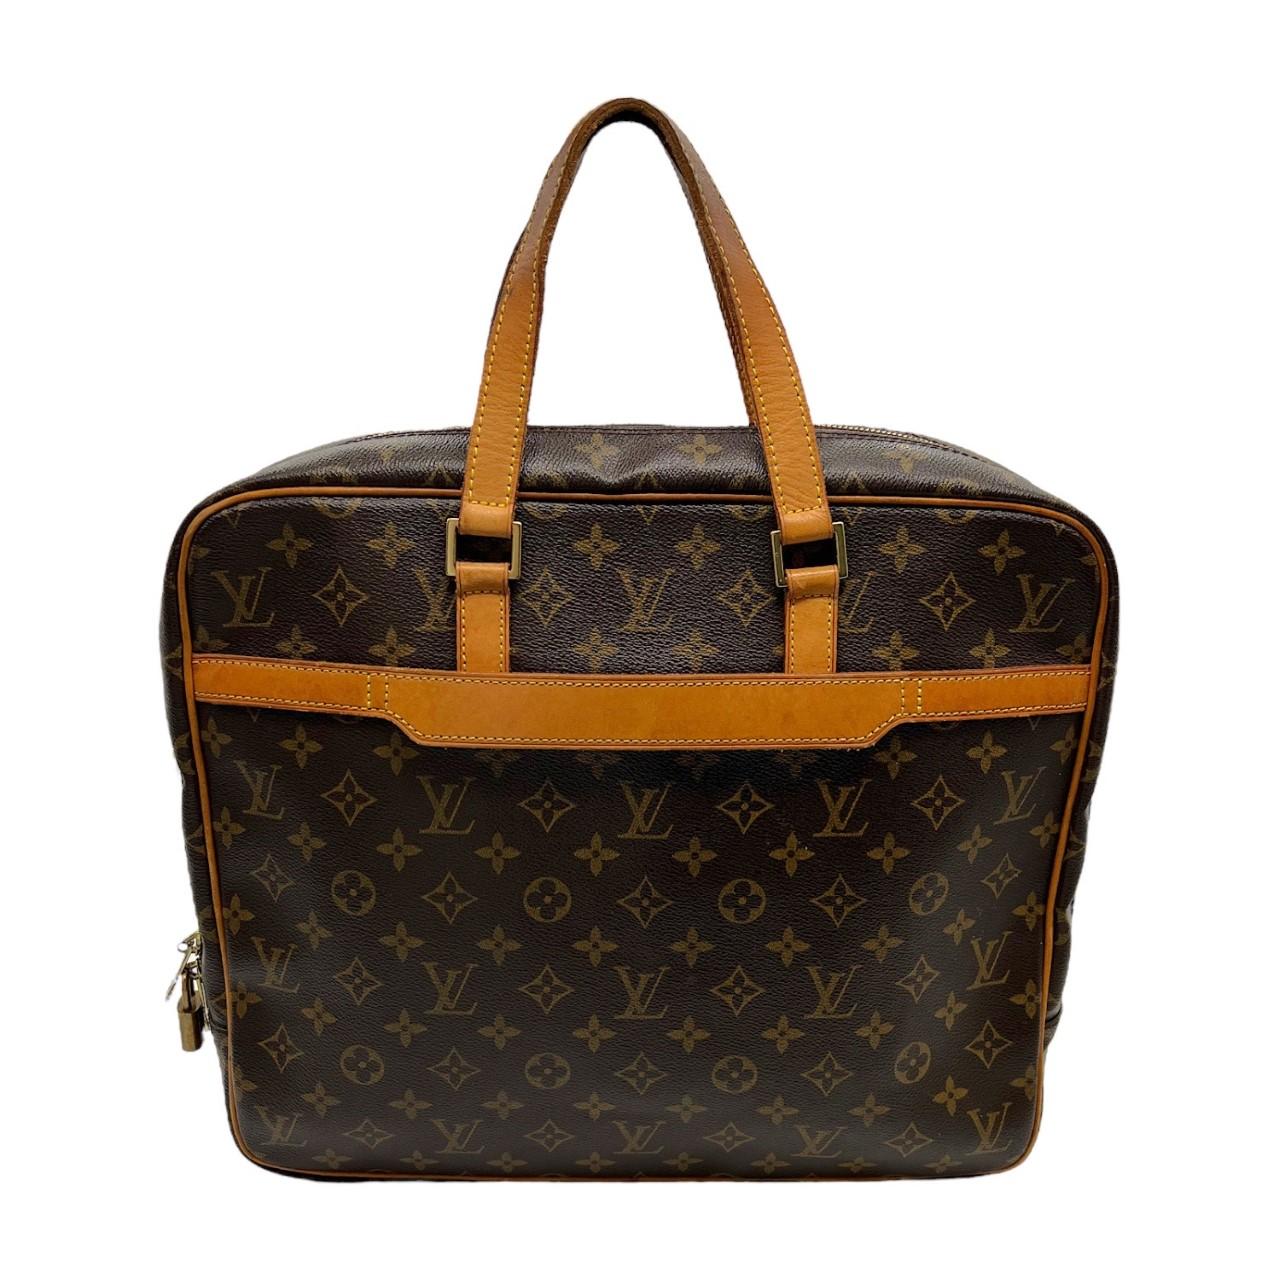 We are offering this beautiful Louis Vuitton Monogram Porte-Documents Pegase handbag. Made in France in 2002, it is finely crafted of the iconic brown Louis Vuitton monogram canvas with light brown leather trims and dual light brown leather flat